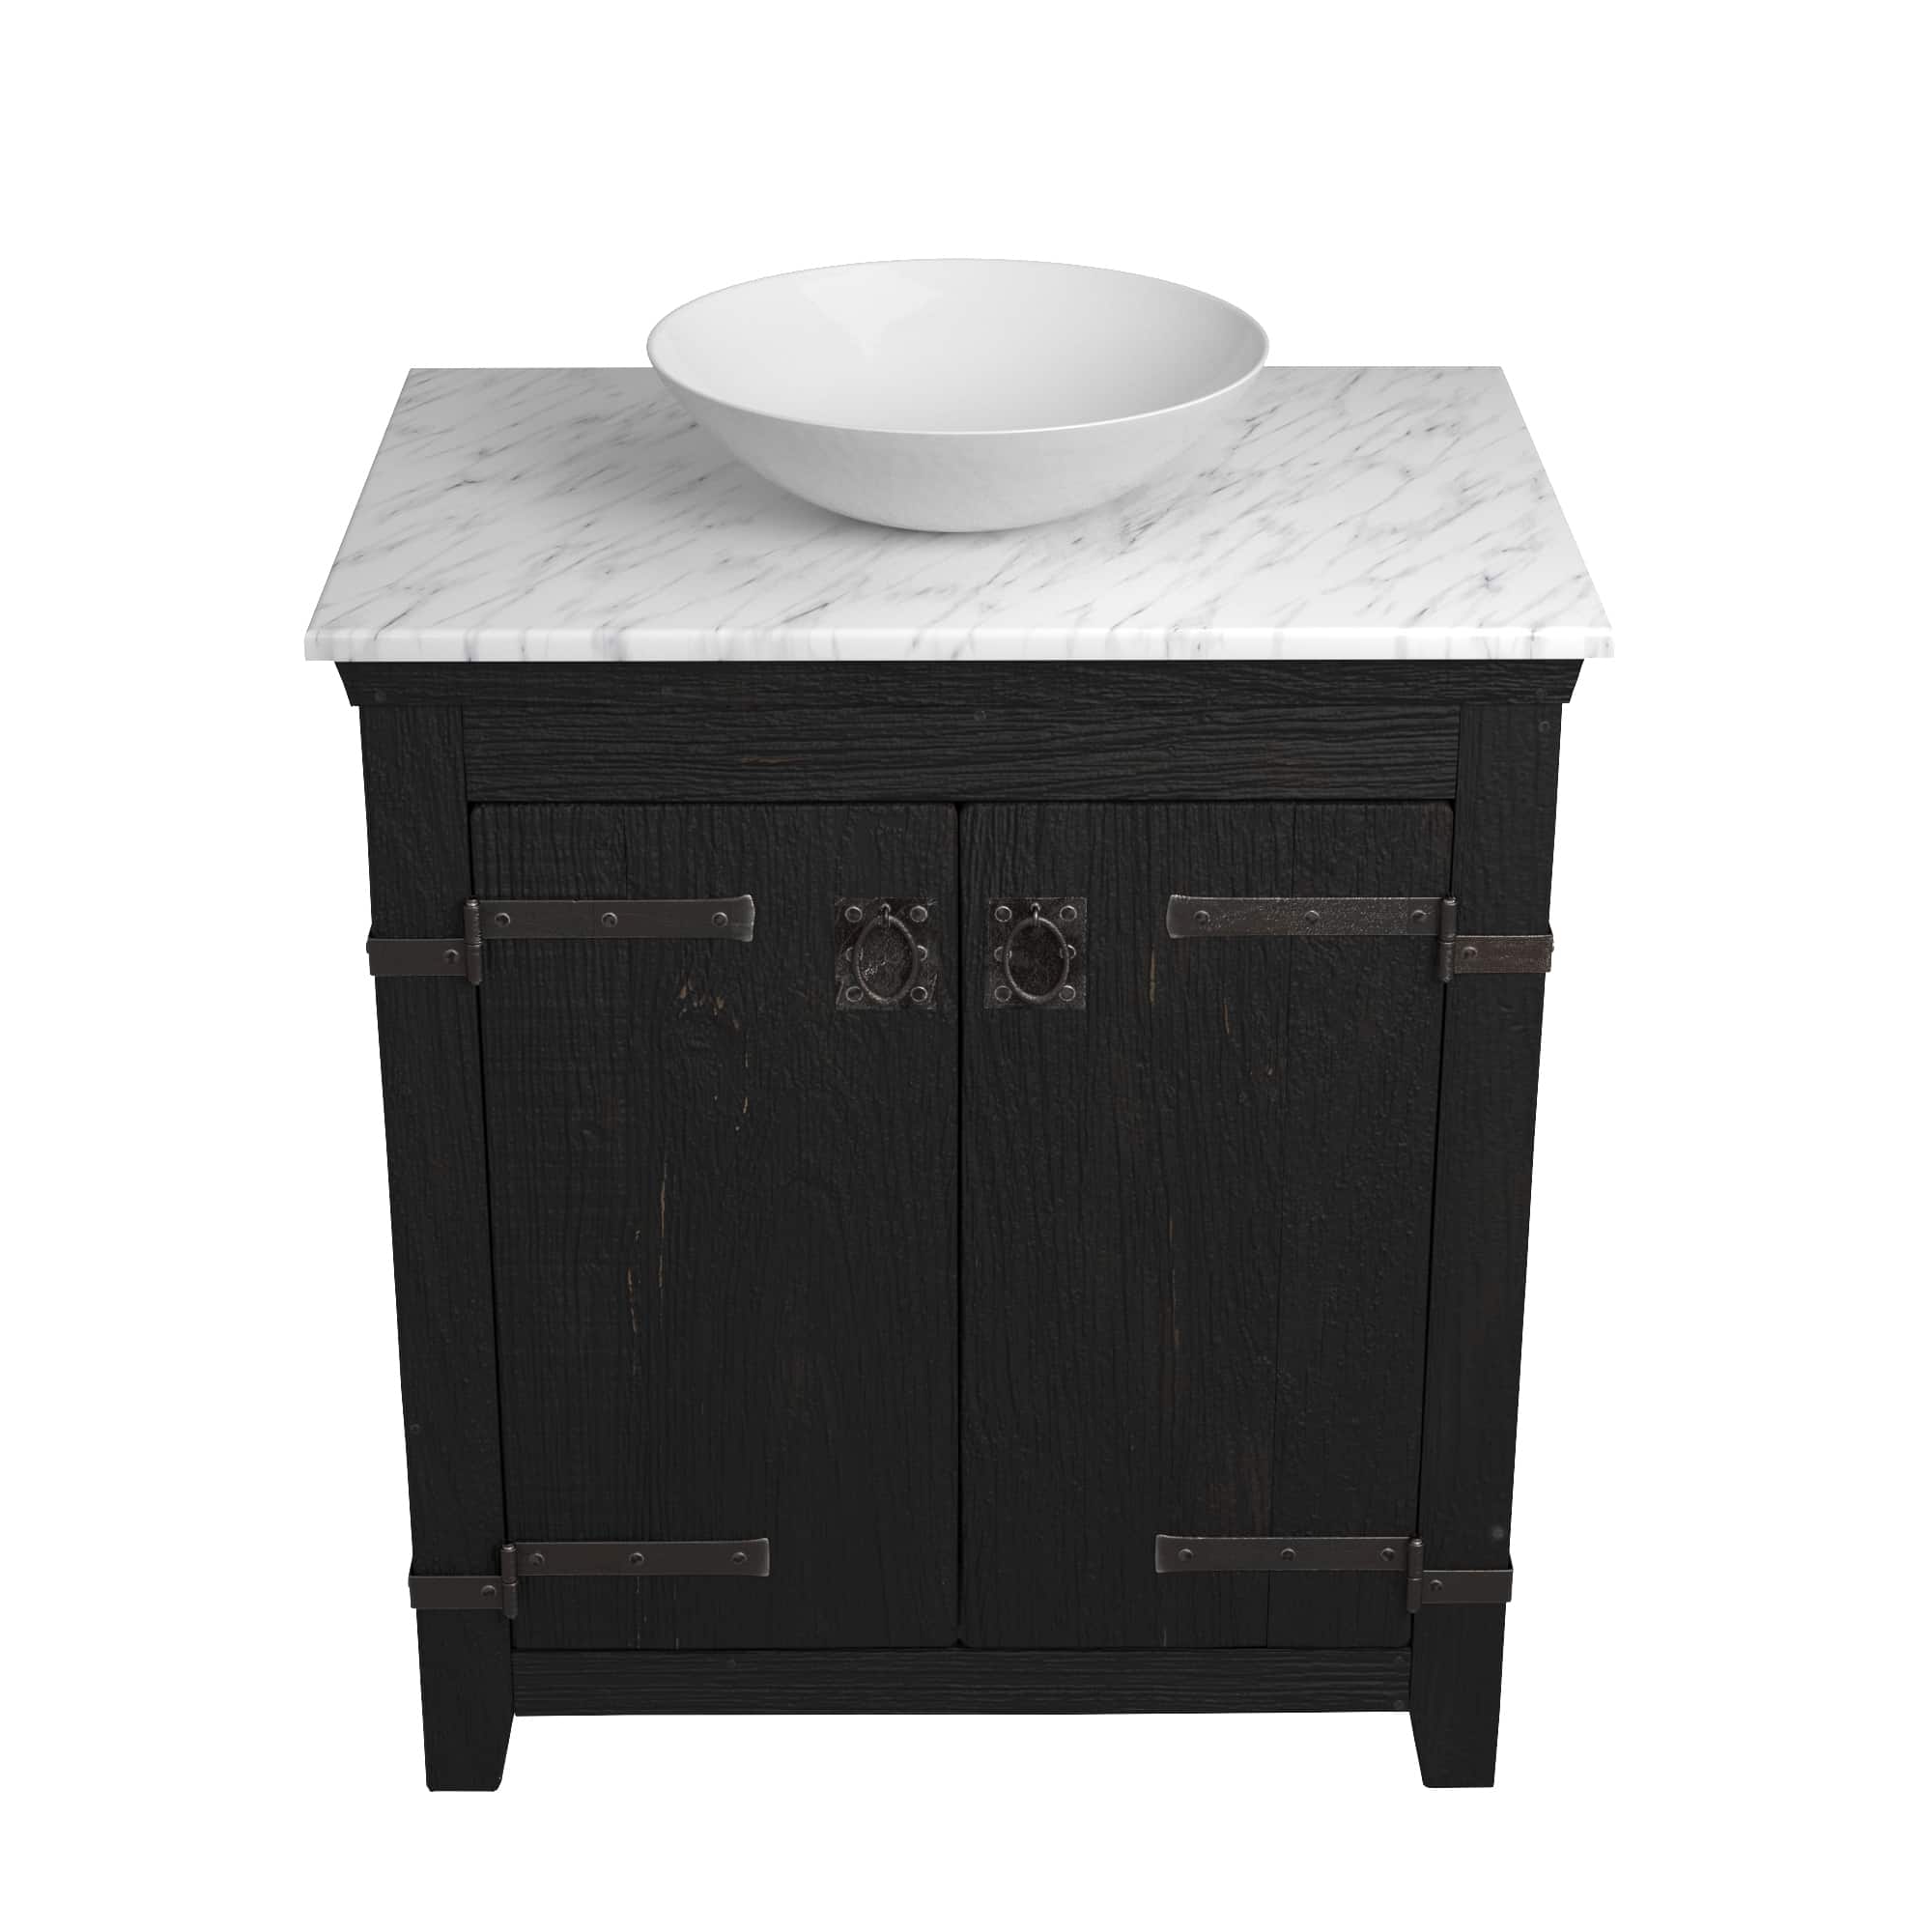 Native Trails 30" Americana Vanity in Anvil with Carrara Marble Top and Verona in Bianco, Single Faucet Hole, BND30-VB-CT-MG-077